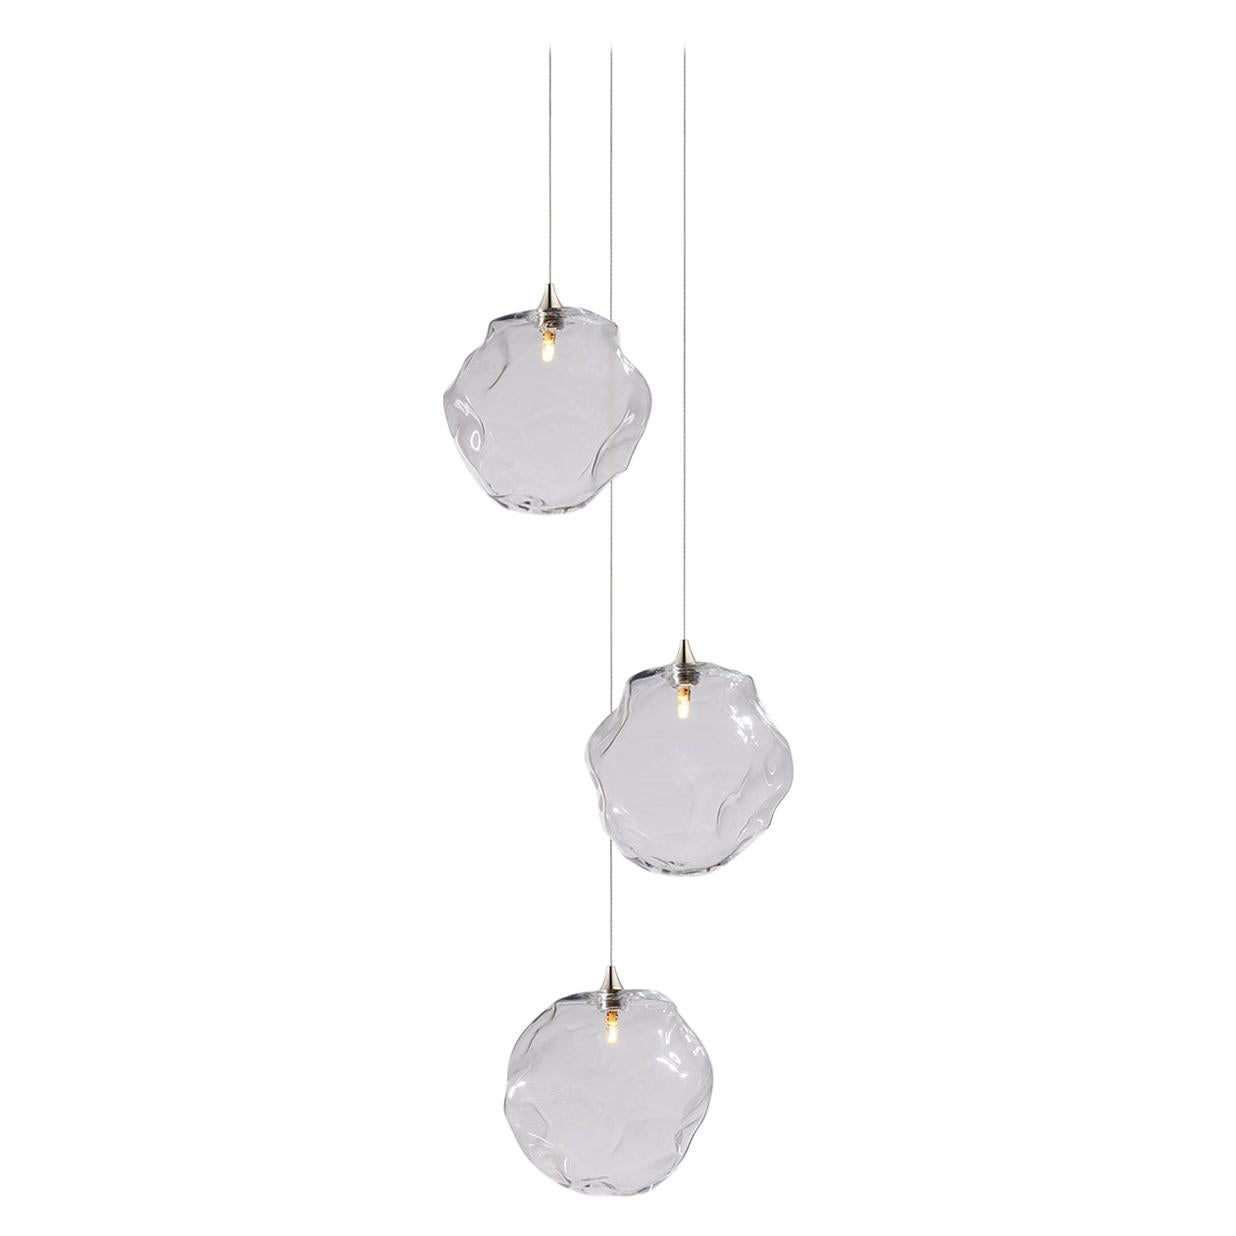 Nimbus 3, 8 Inches Dia Blown Glass Pendant Bedside Chandelier by Shakuff